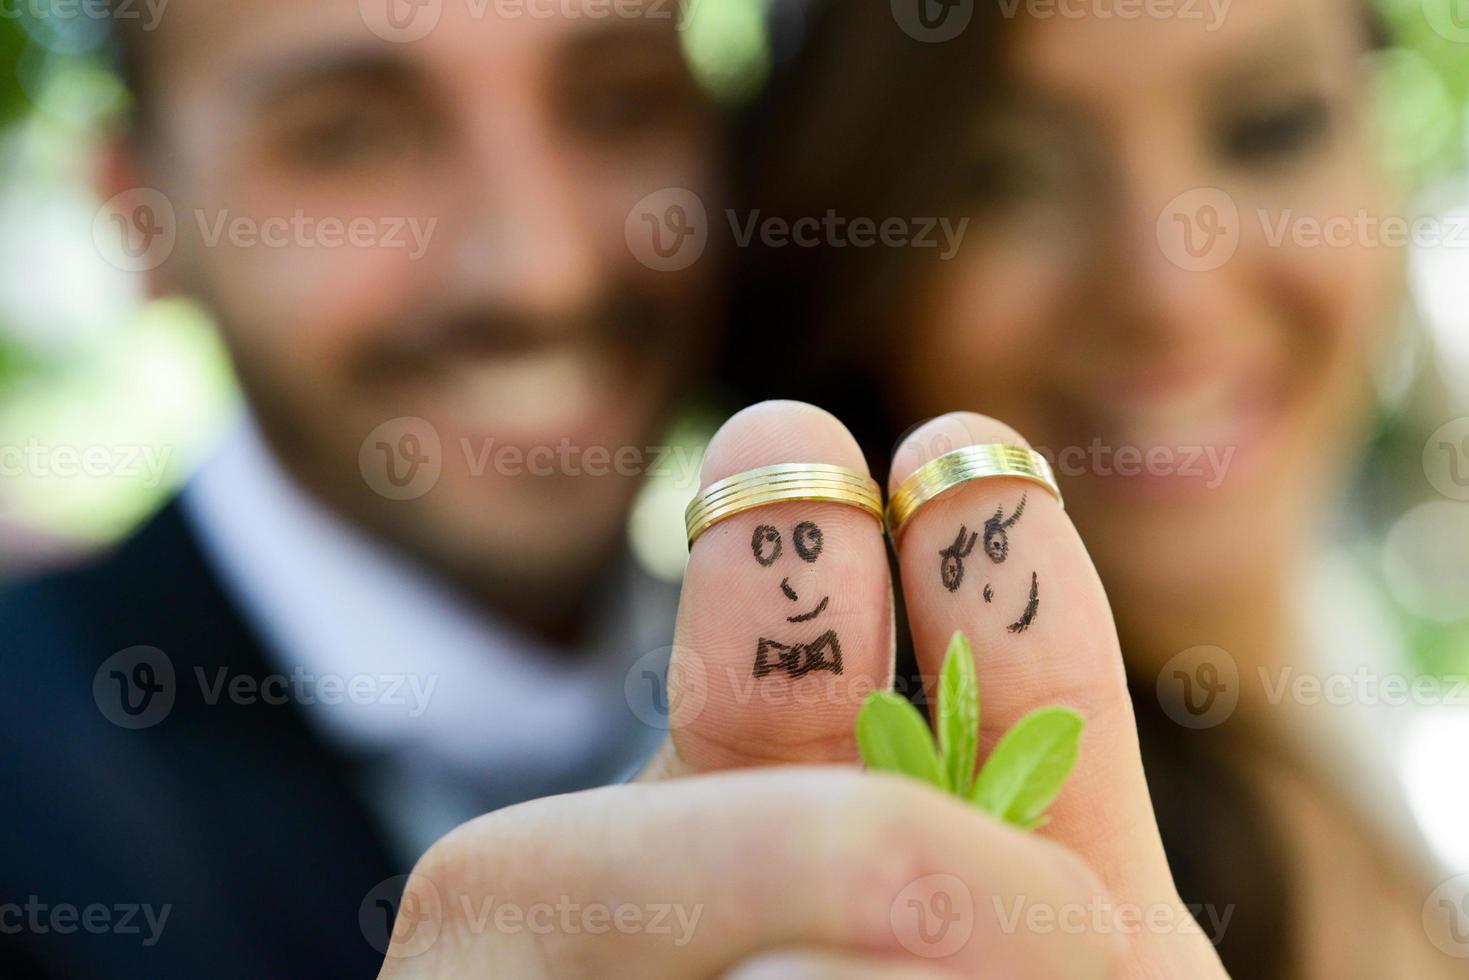 wedding rings on their fingers painted with the bride and groom photo